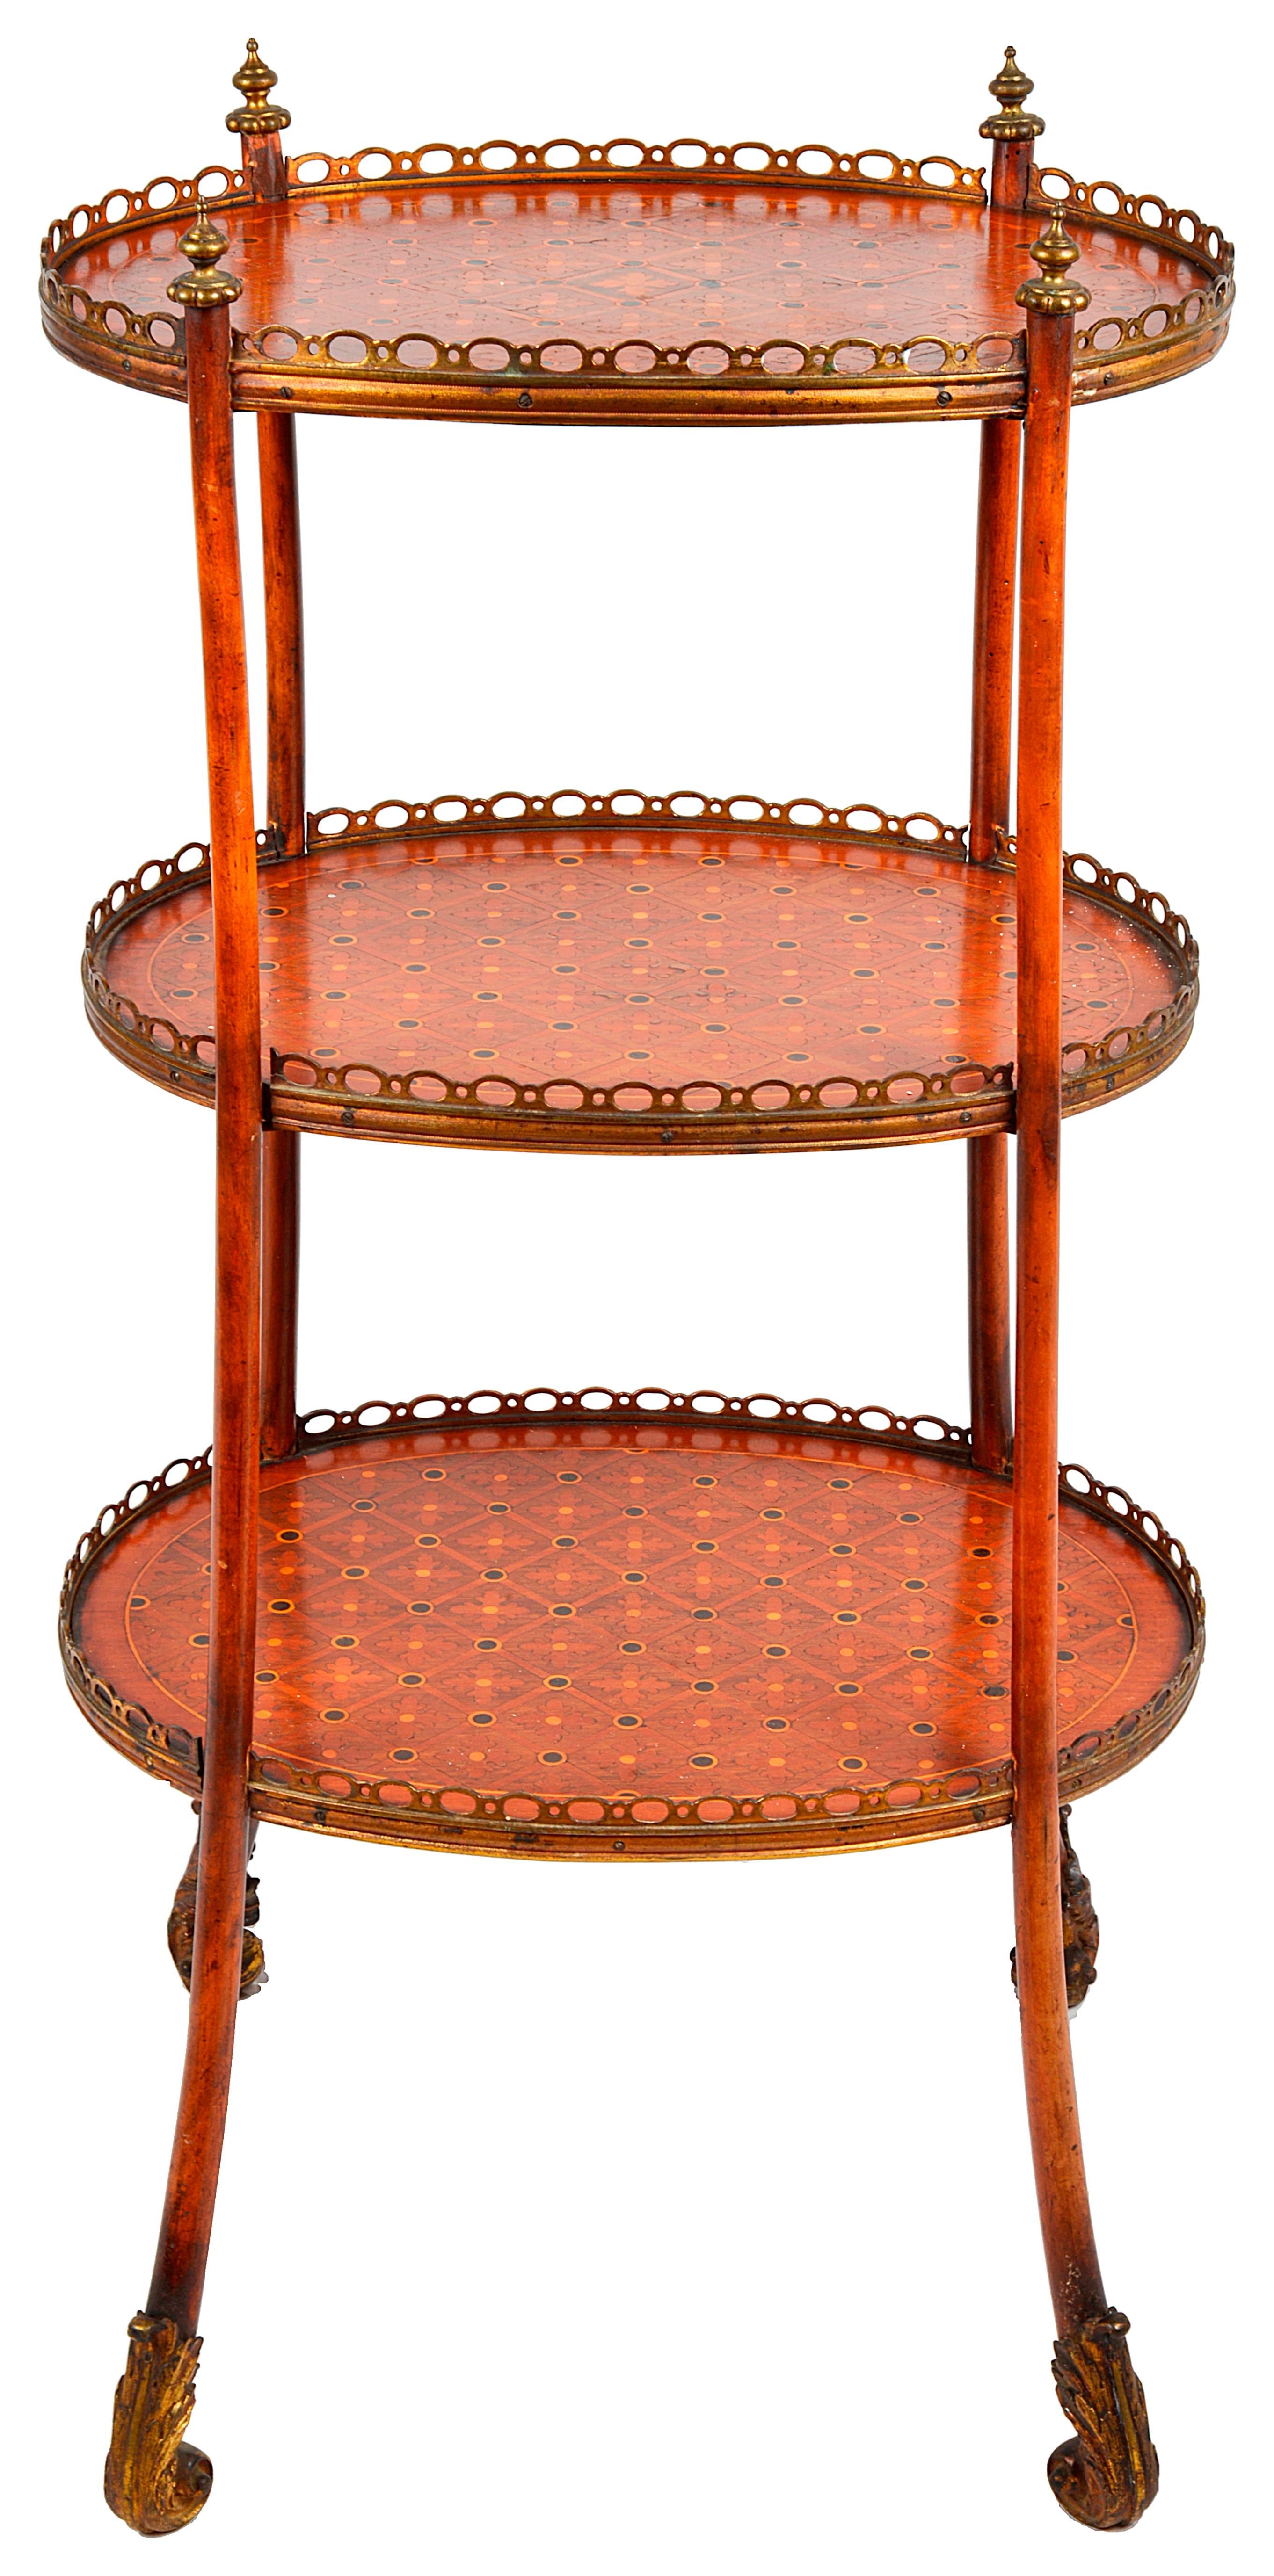 A good quality 19th century, parquetry inlaid three-tier etagere with ormolu mounts in the Louis XVI style.